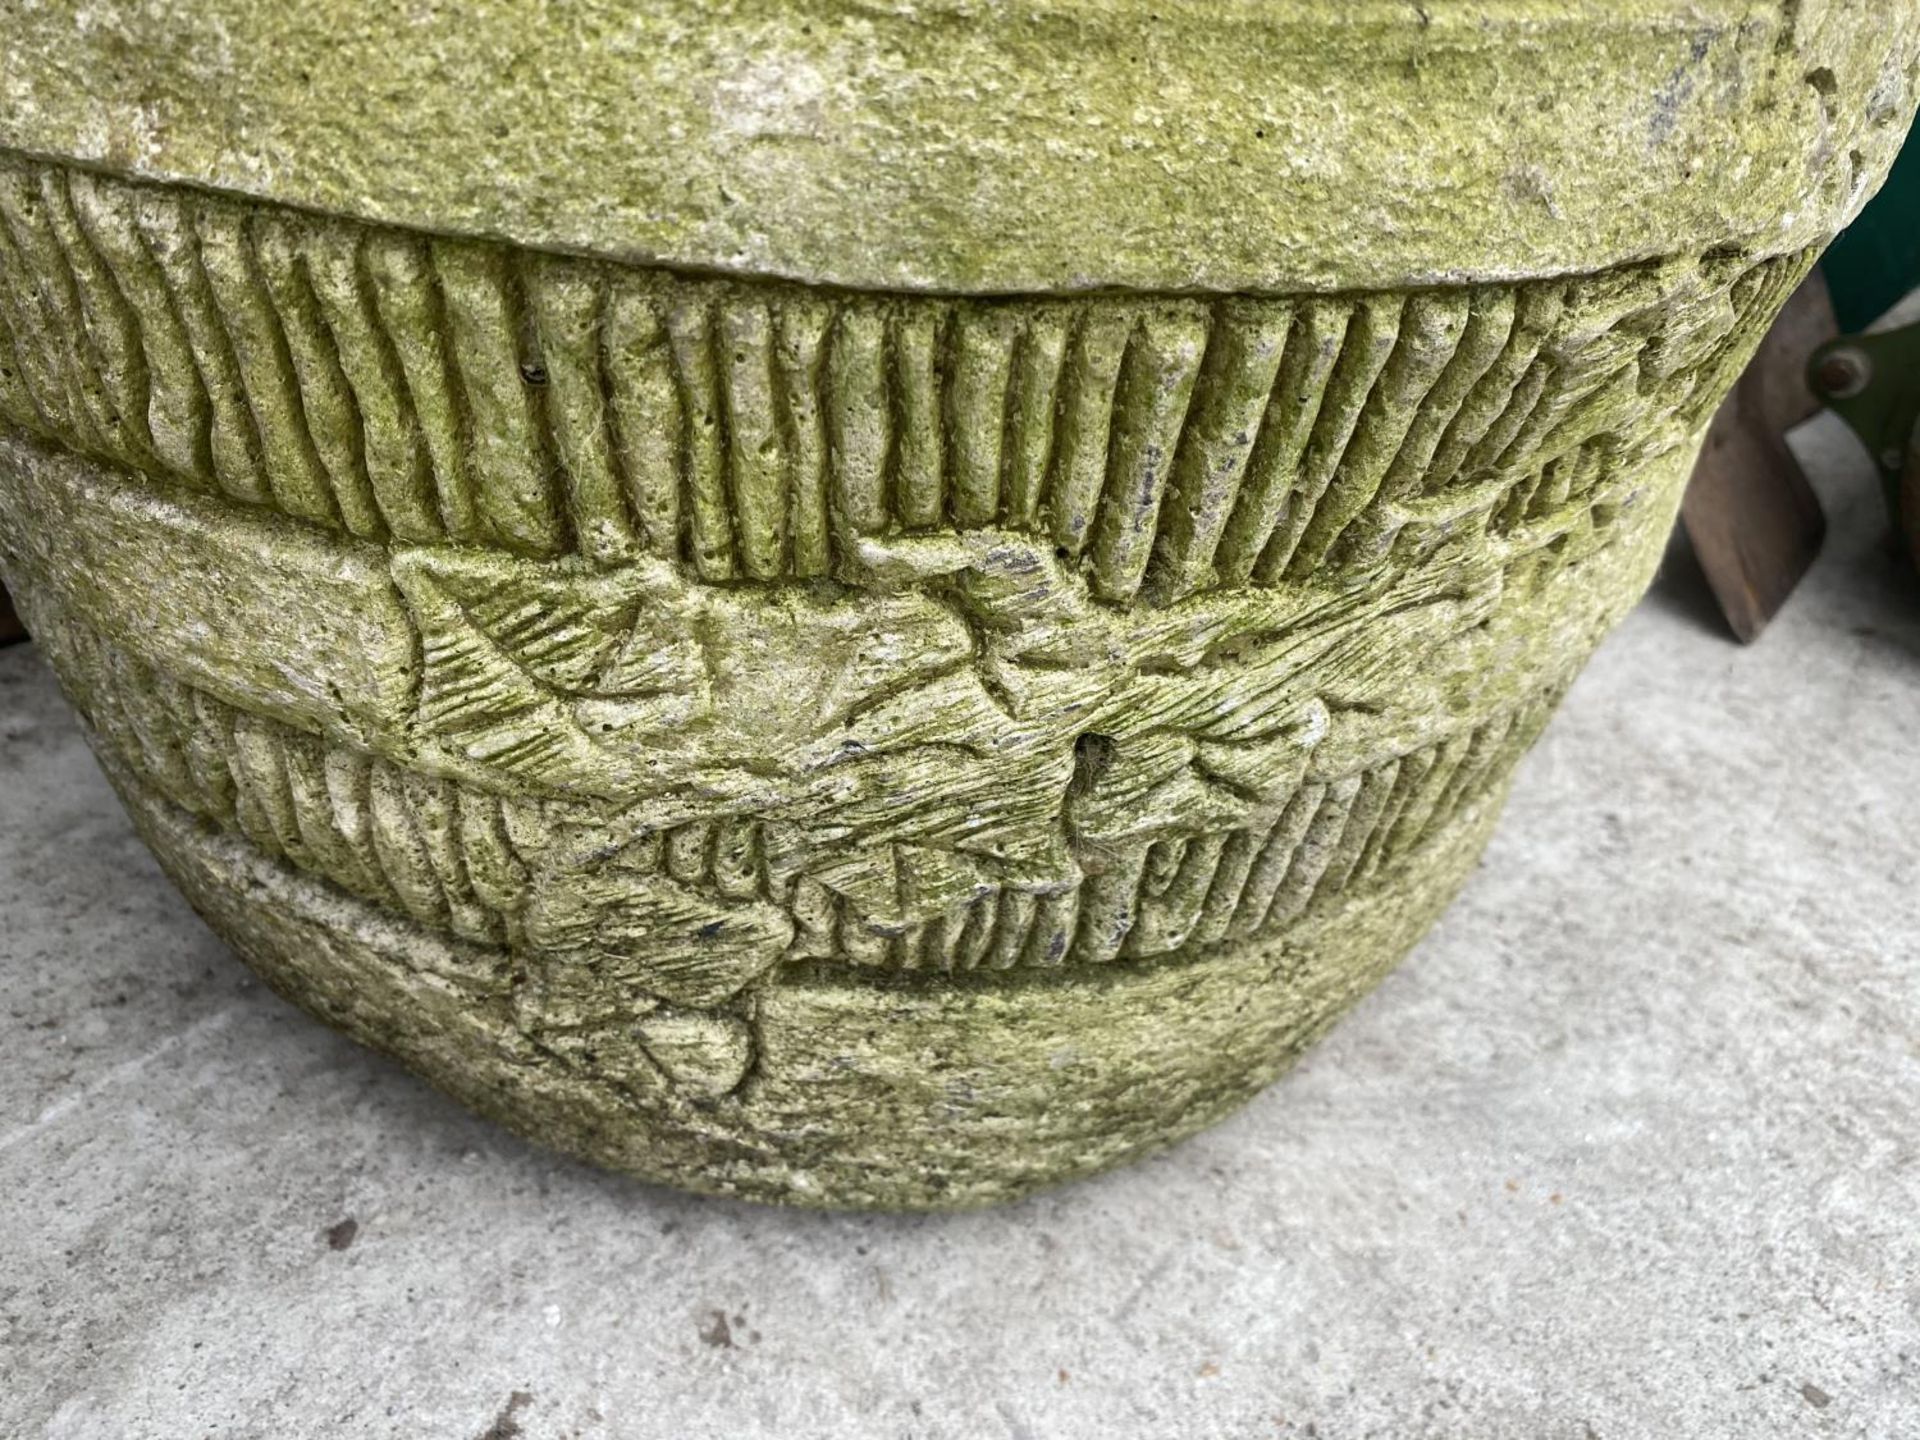 A STONE EFFECT PLANTER - Image 2 of 3